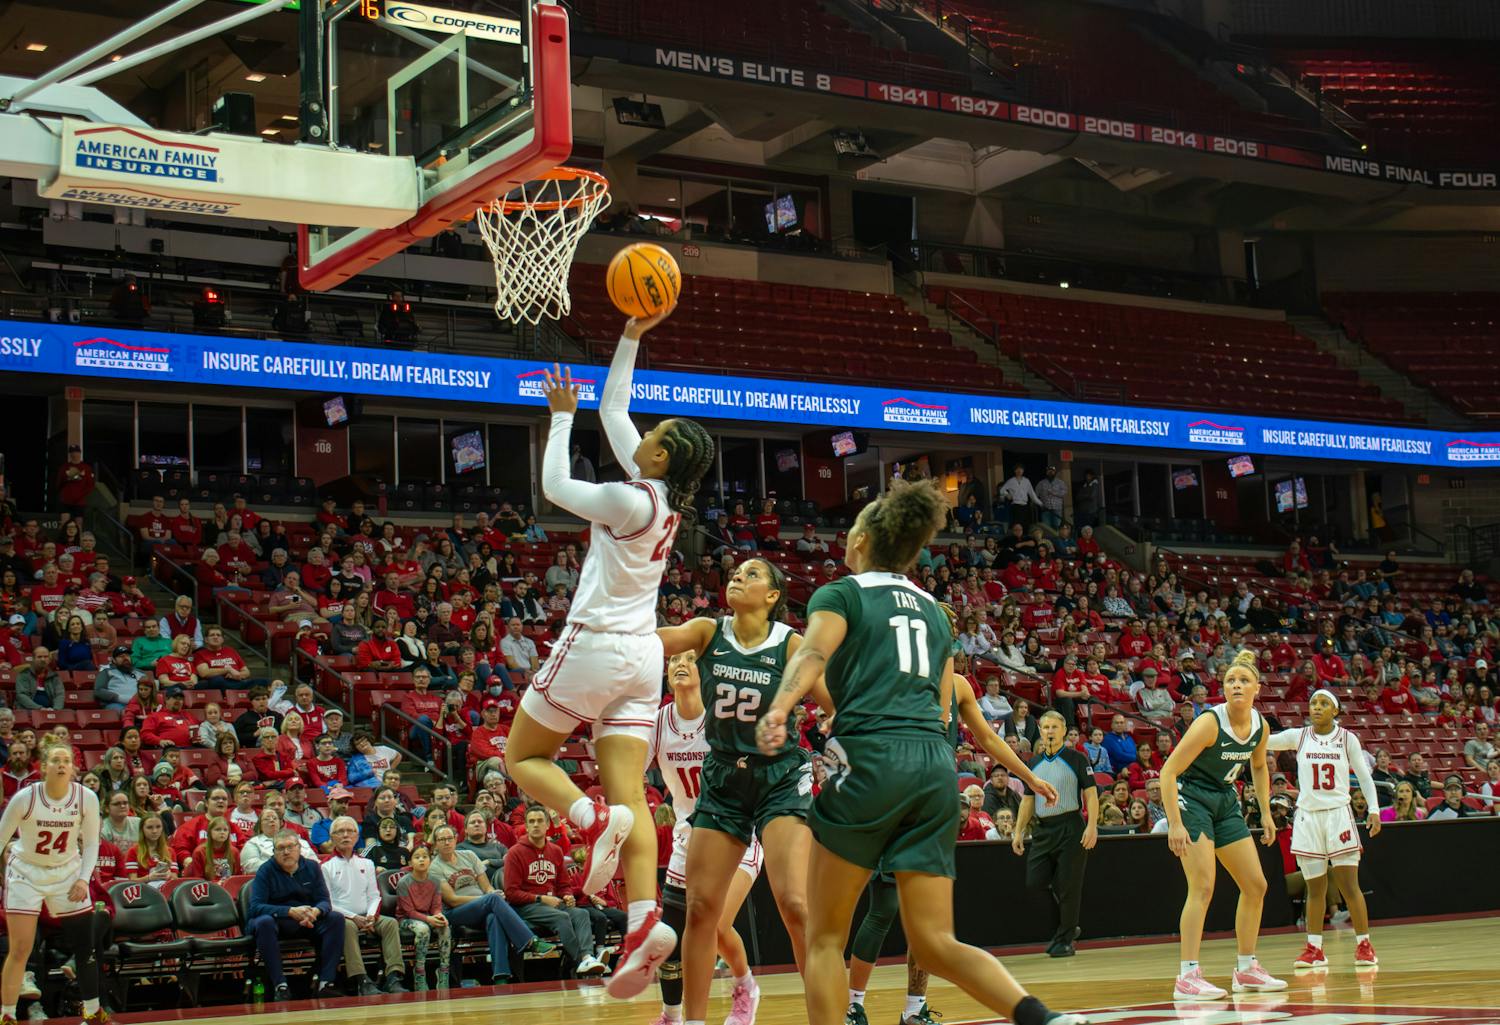 Badgers vs Spartans Women's basketball game at the Kohl center 3.3.24